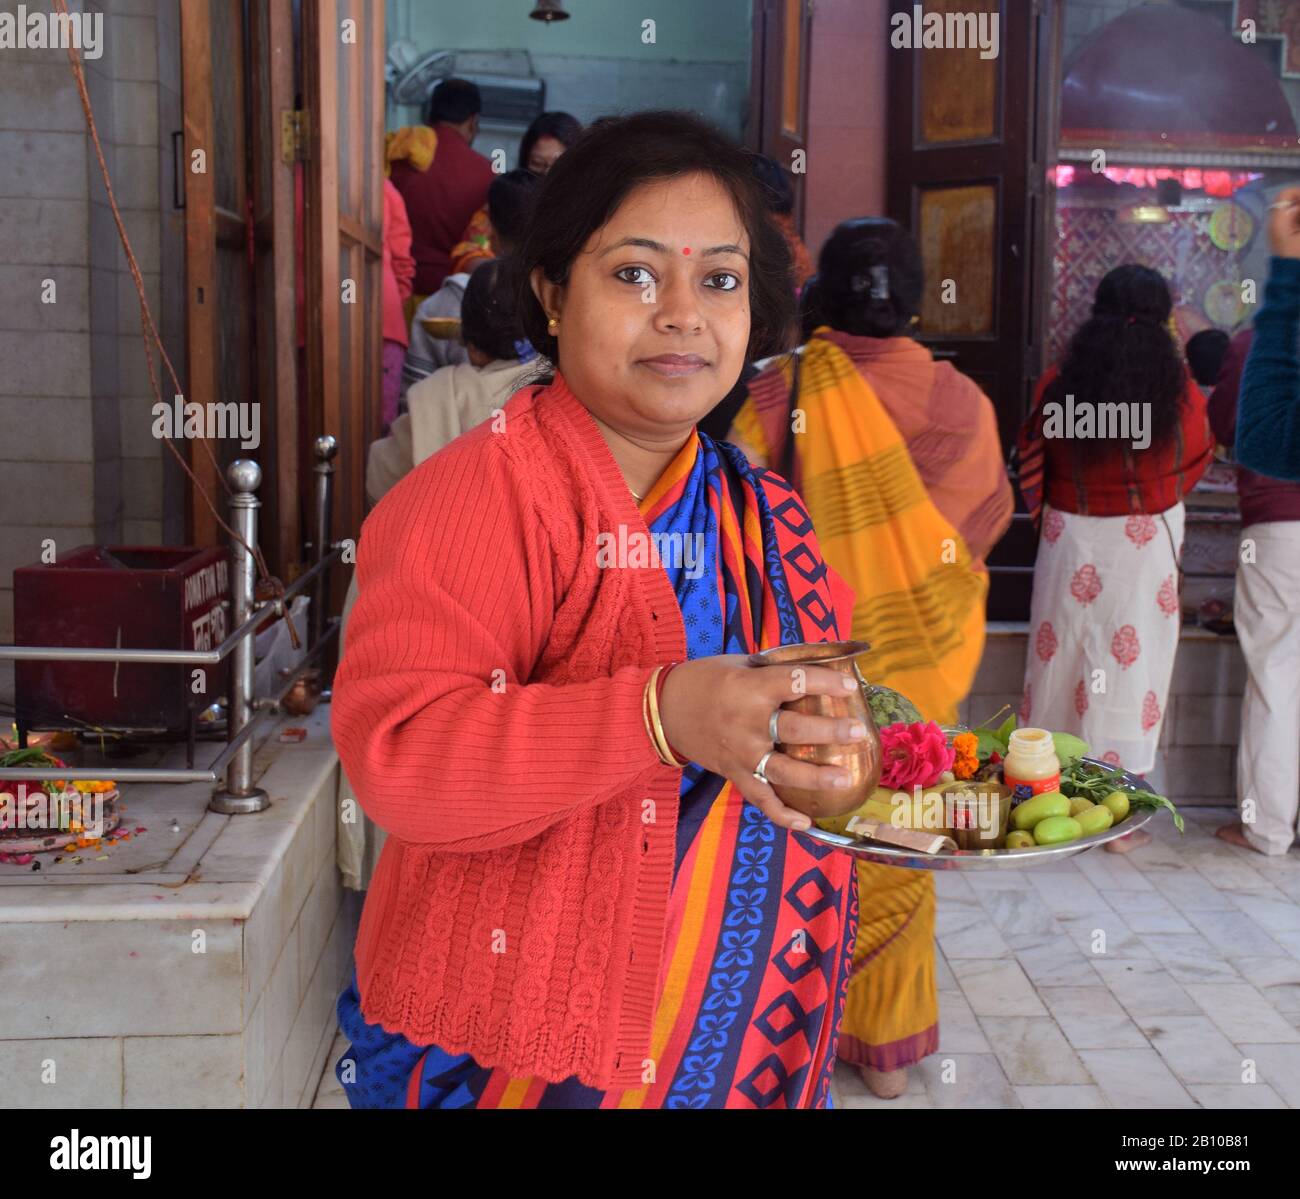 A Hindu women devotee with her Pooja Thali during shivratri Festival in India Stock Photo